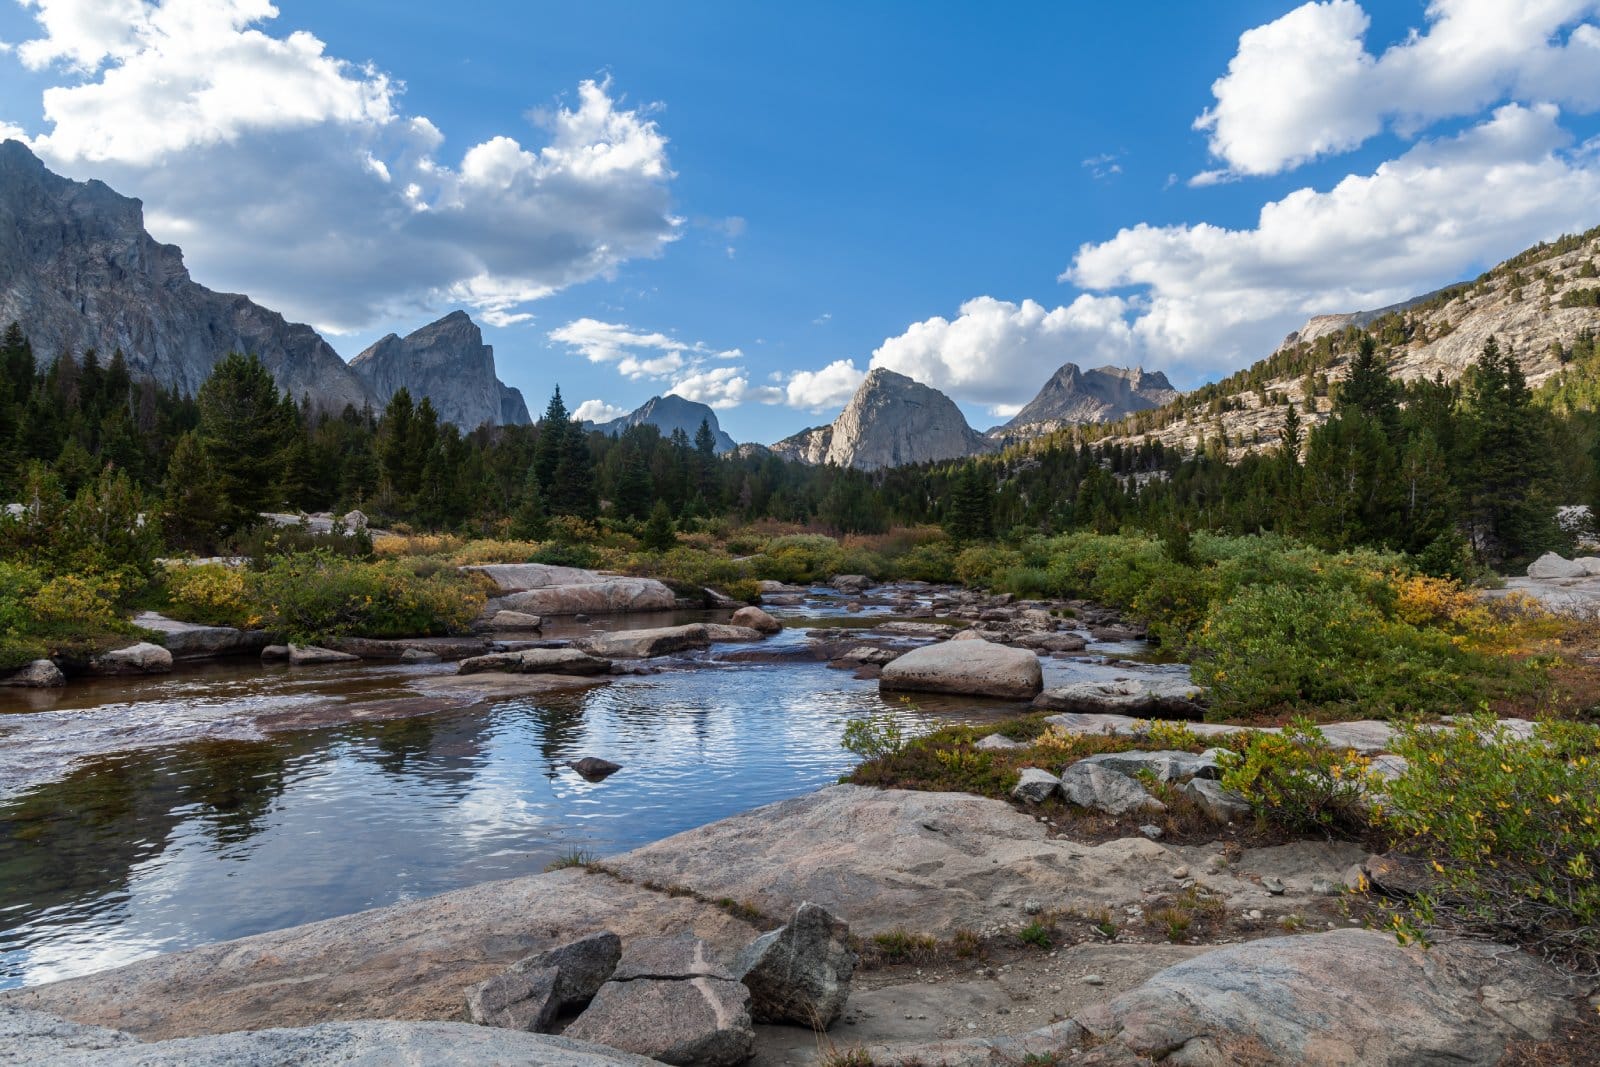 <p class="wp-caption-text">Image Credit: Shutterstock / Peter Silverman Photo</p>  <p>A hiker’s and climber’s paradise offering untouched wilderness. It’s where solitude is easy to find, and the vistas are endless.</p>